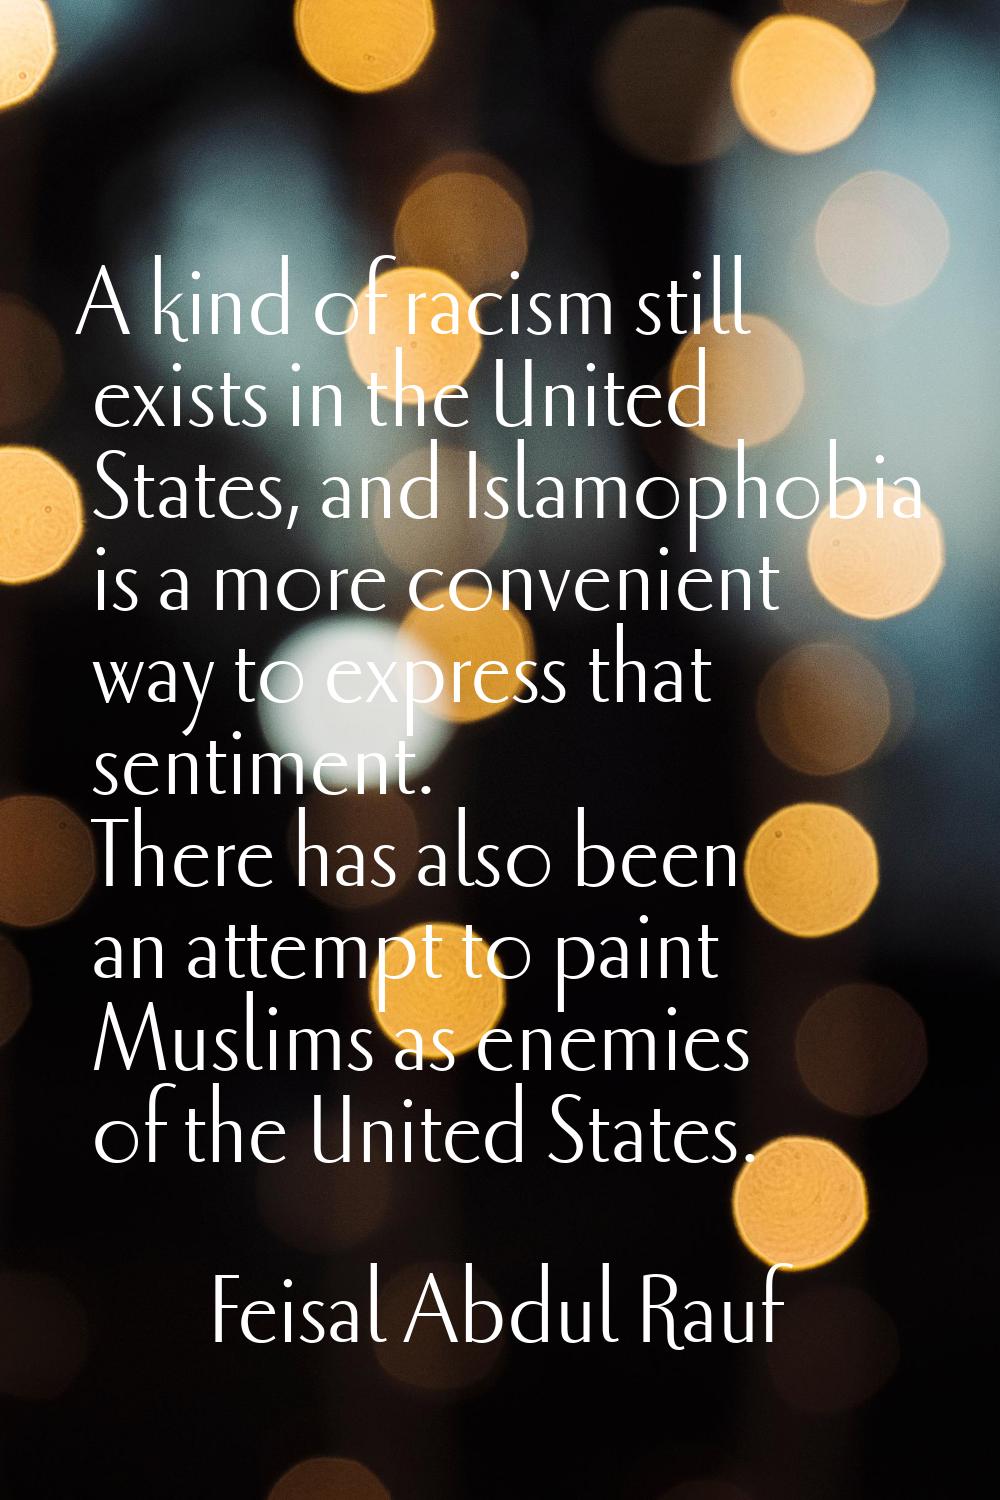 A kind of racism still exists in the United States, and Islamophobia is a more convenient way to ex